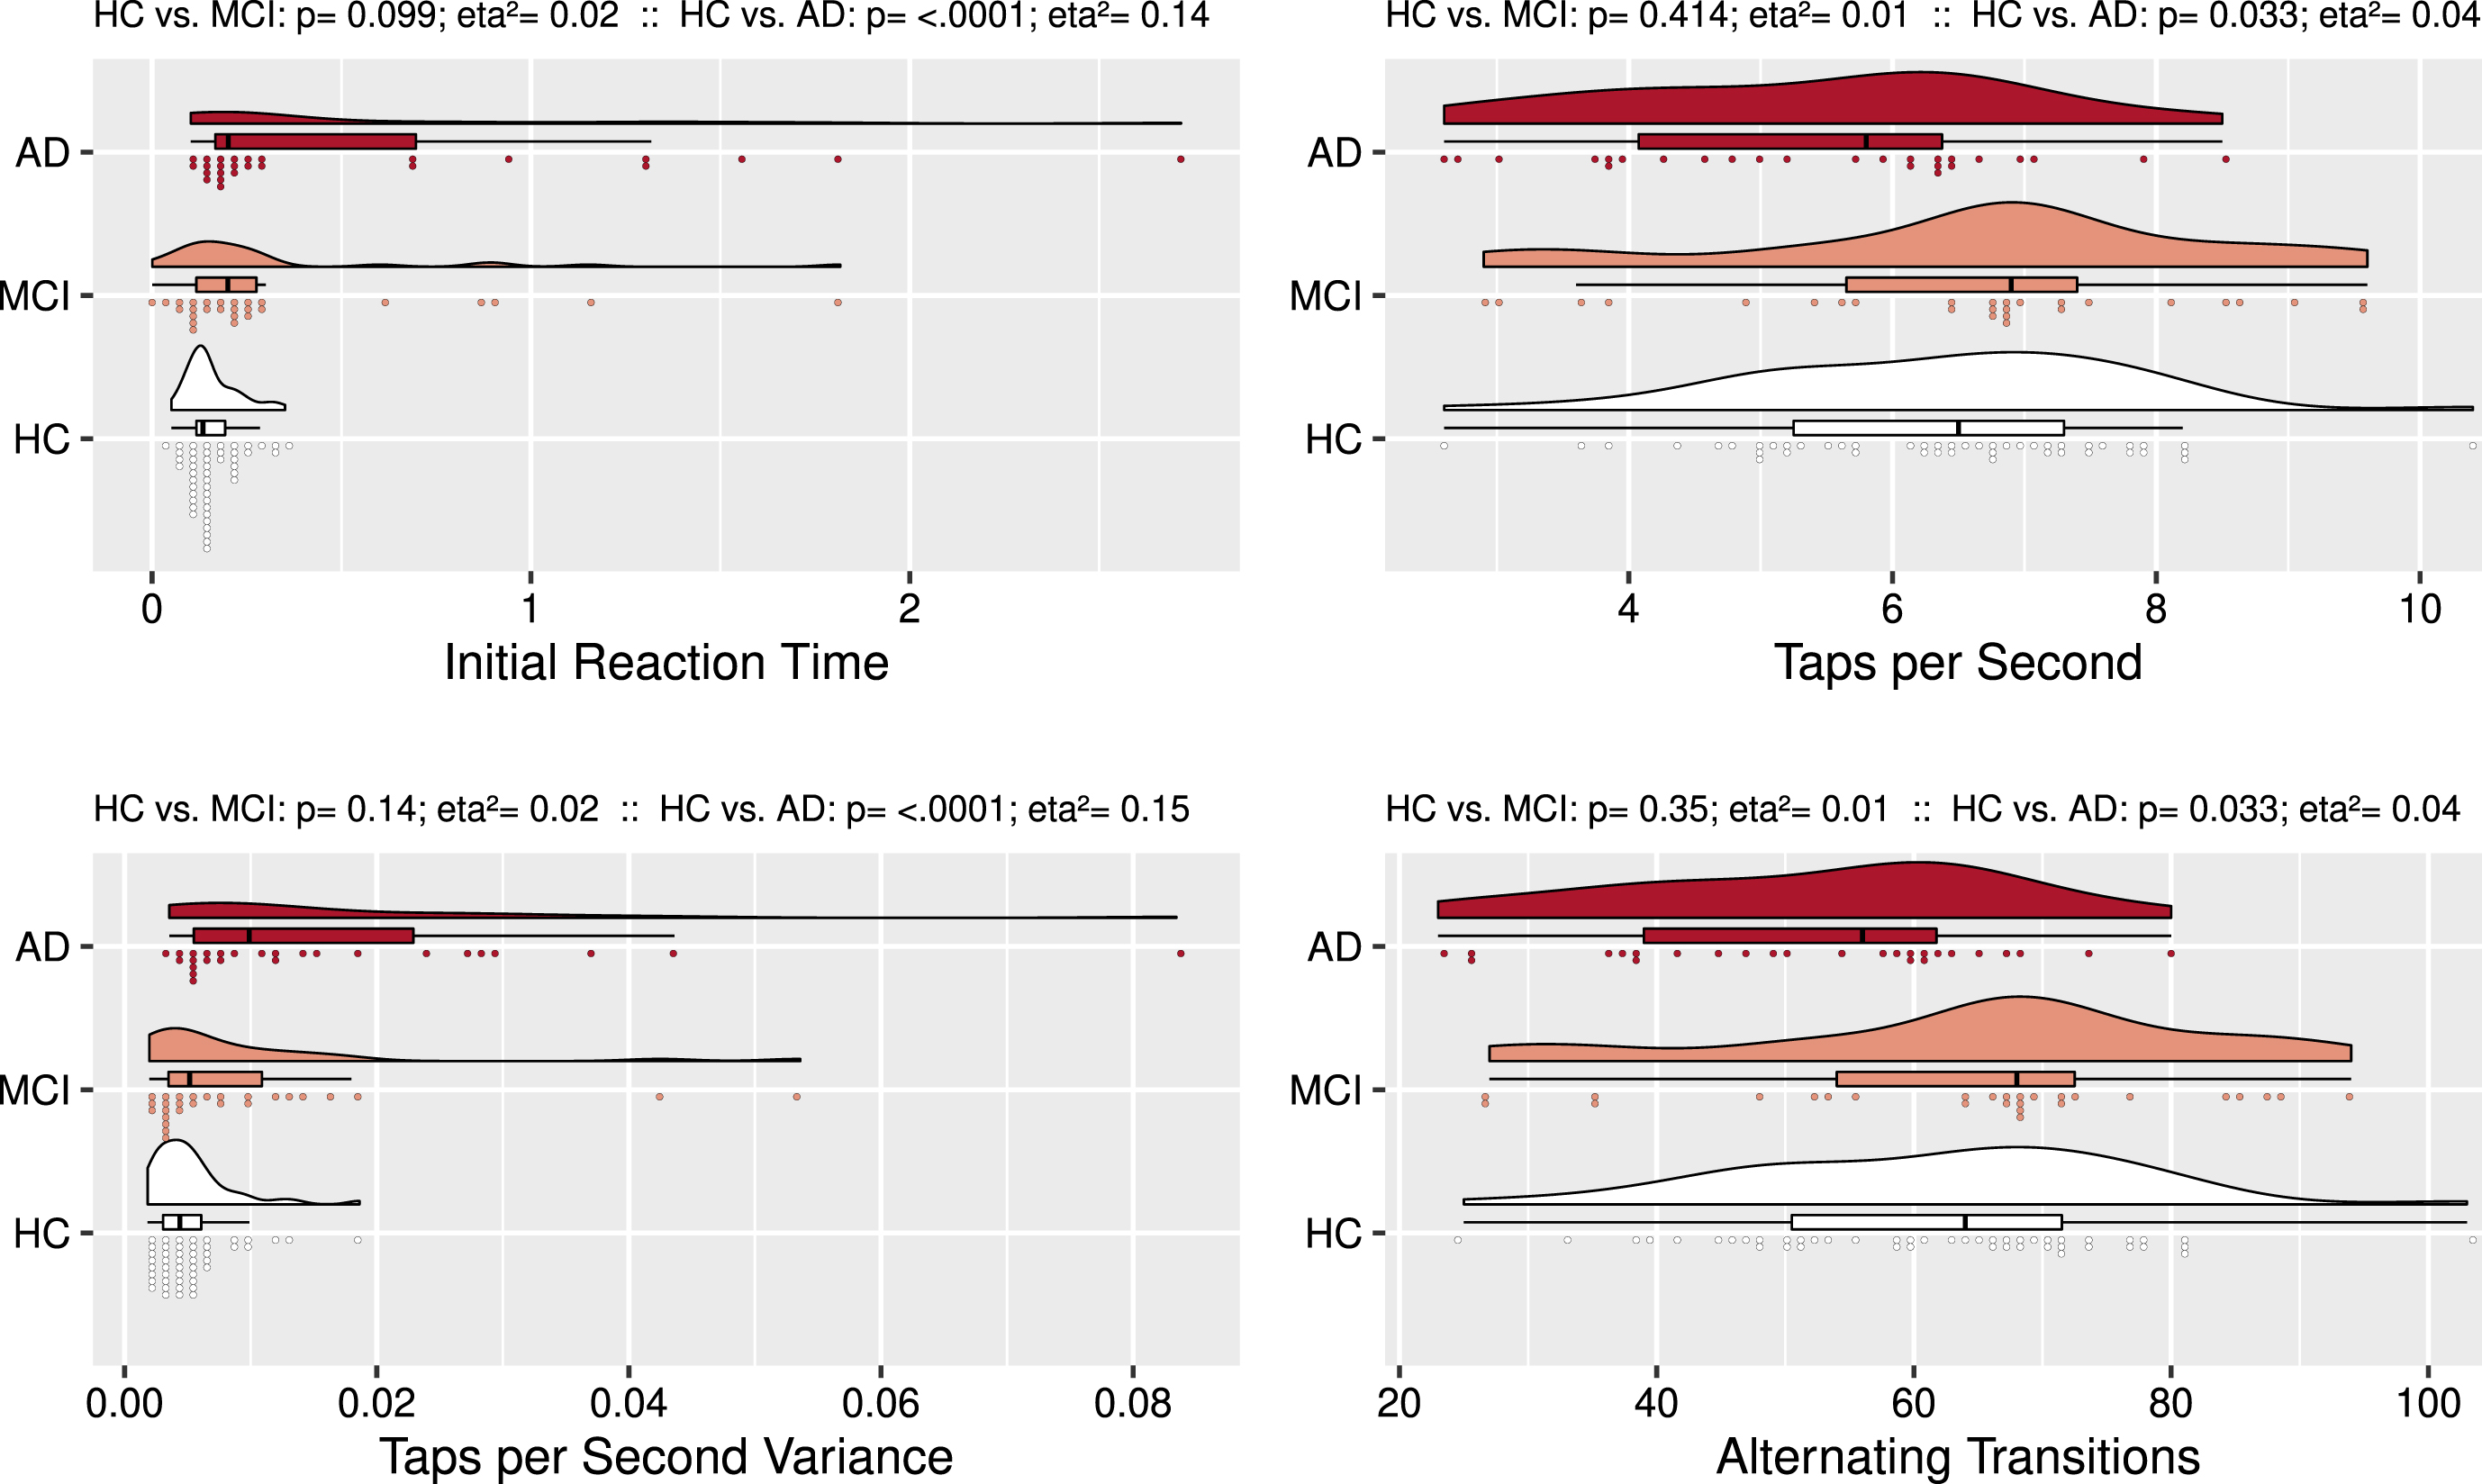 Alternate Finger Tapping: Group Comparisons. Rain cloud plots with density curves, boxplots, and individual subject scores divided over 75 bins. Compared to controls, AD subjects had a longer Initial Reaction Time, fewer Taps per Second, larger Taps per Second Variance, and fewer Consecutive Taps.